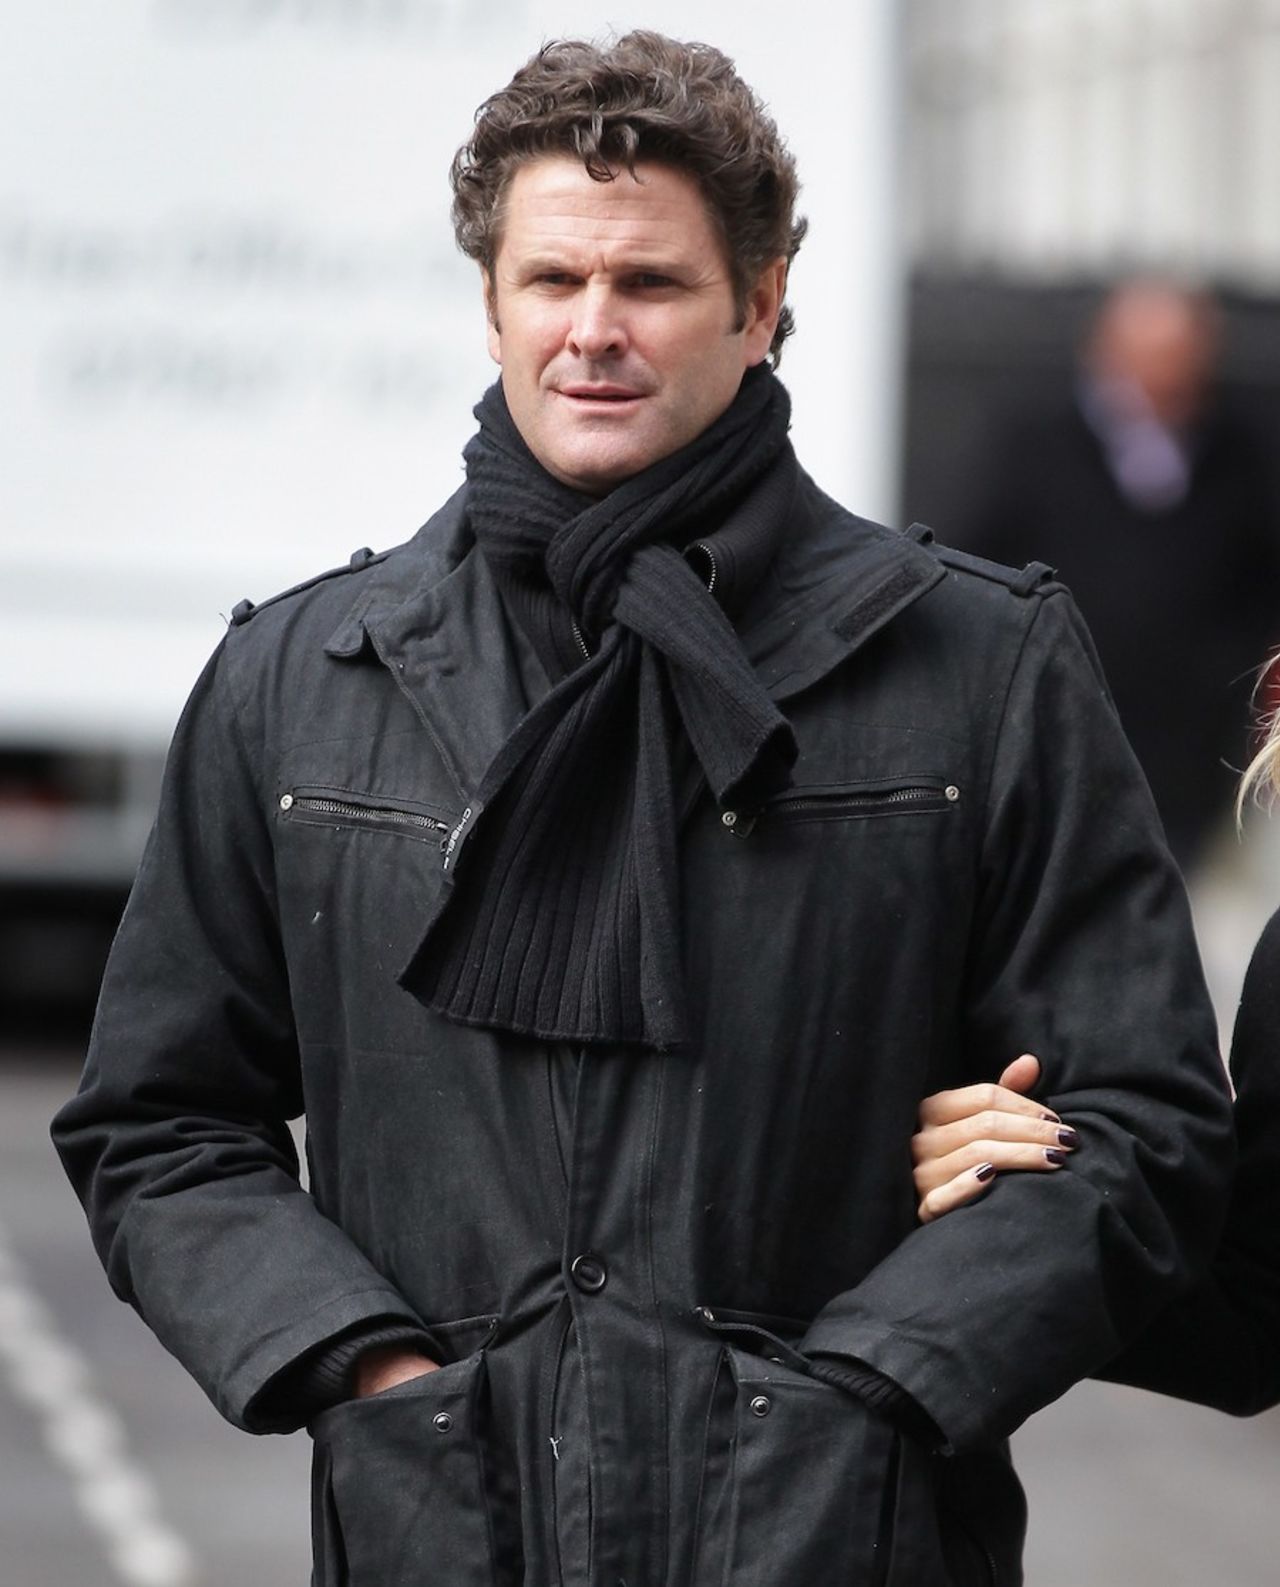 Chris Cairns arrives at the high court, London, March 5, 2012